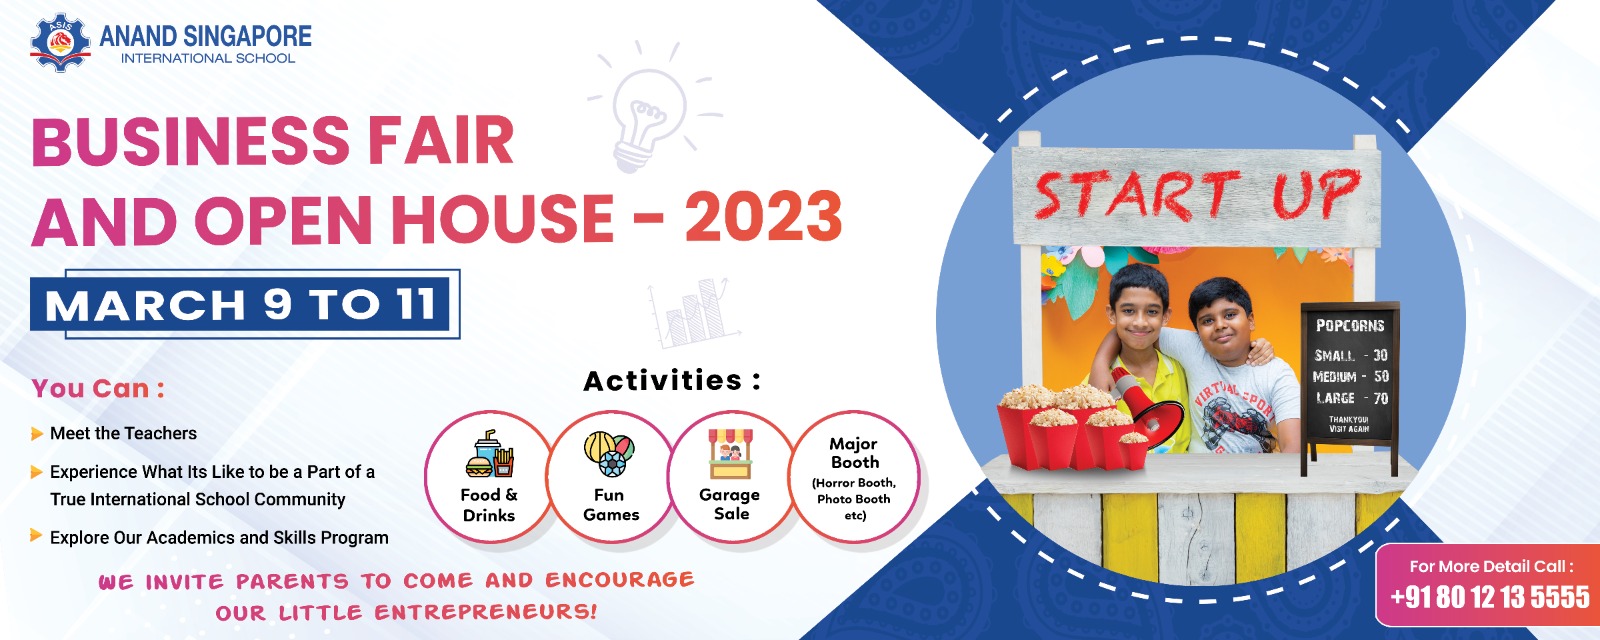 Business Fair and Open House - 2023